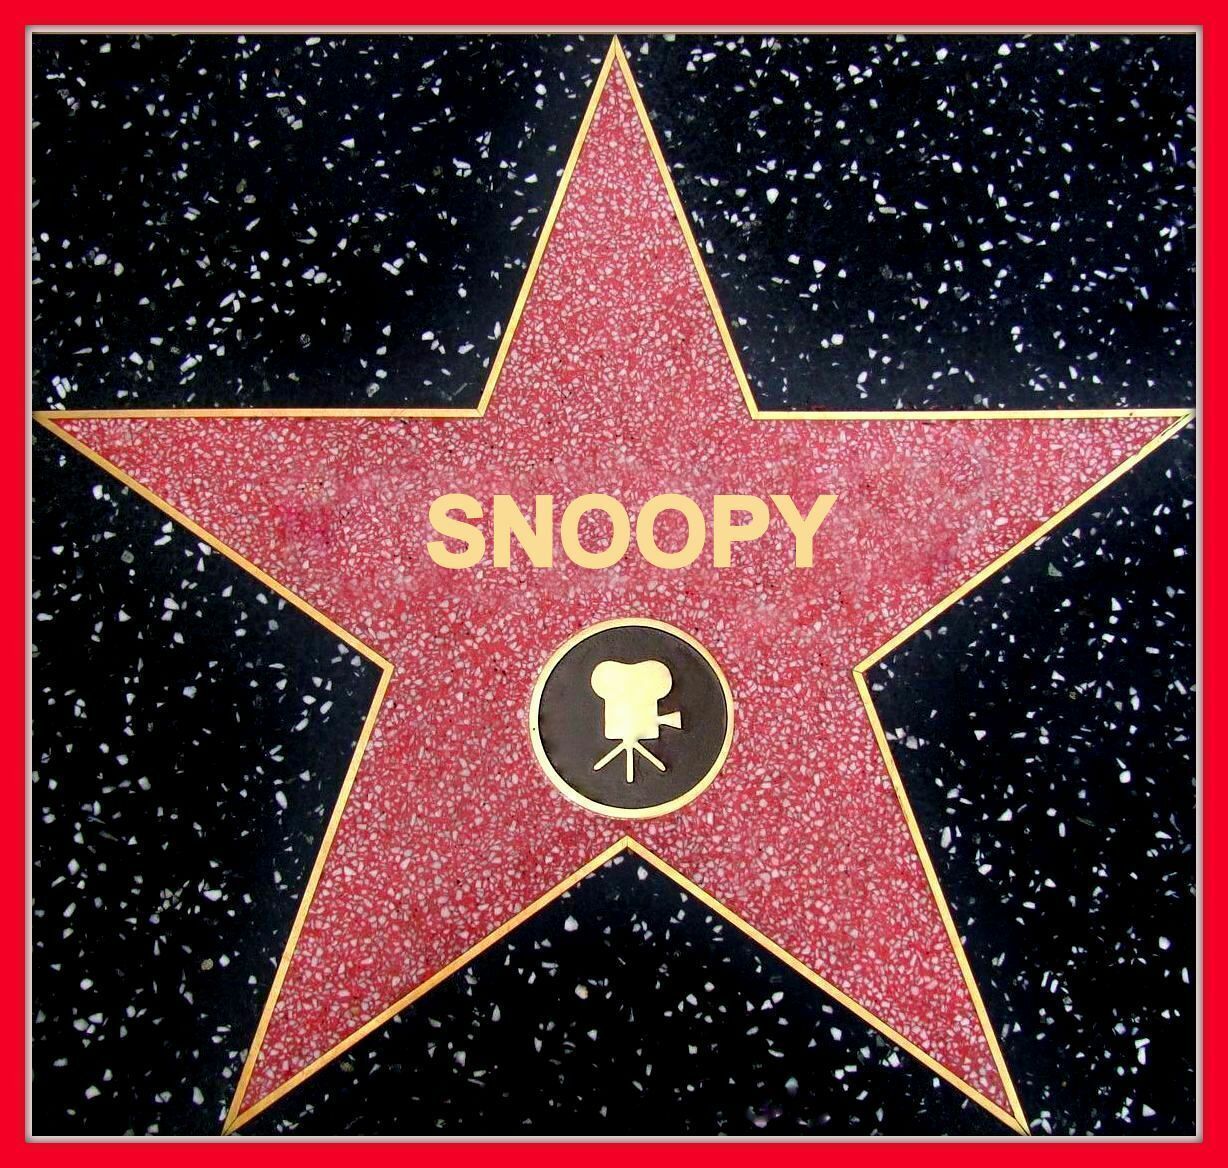 CUSTOMIZED HOLLYWOOD WALK OF FAME STAR STICKER DECAL ADD YOUR NAME ALL SIZES - $7.28 - $12.14